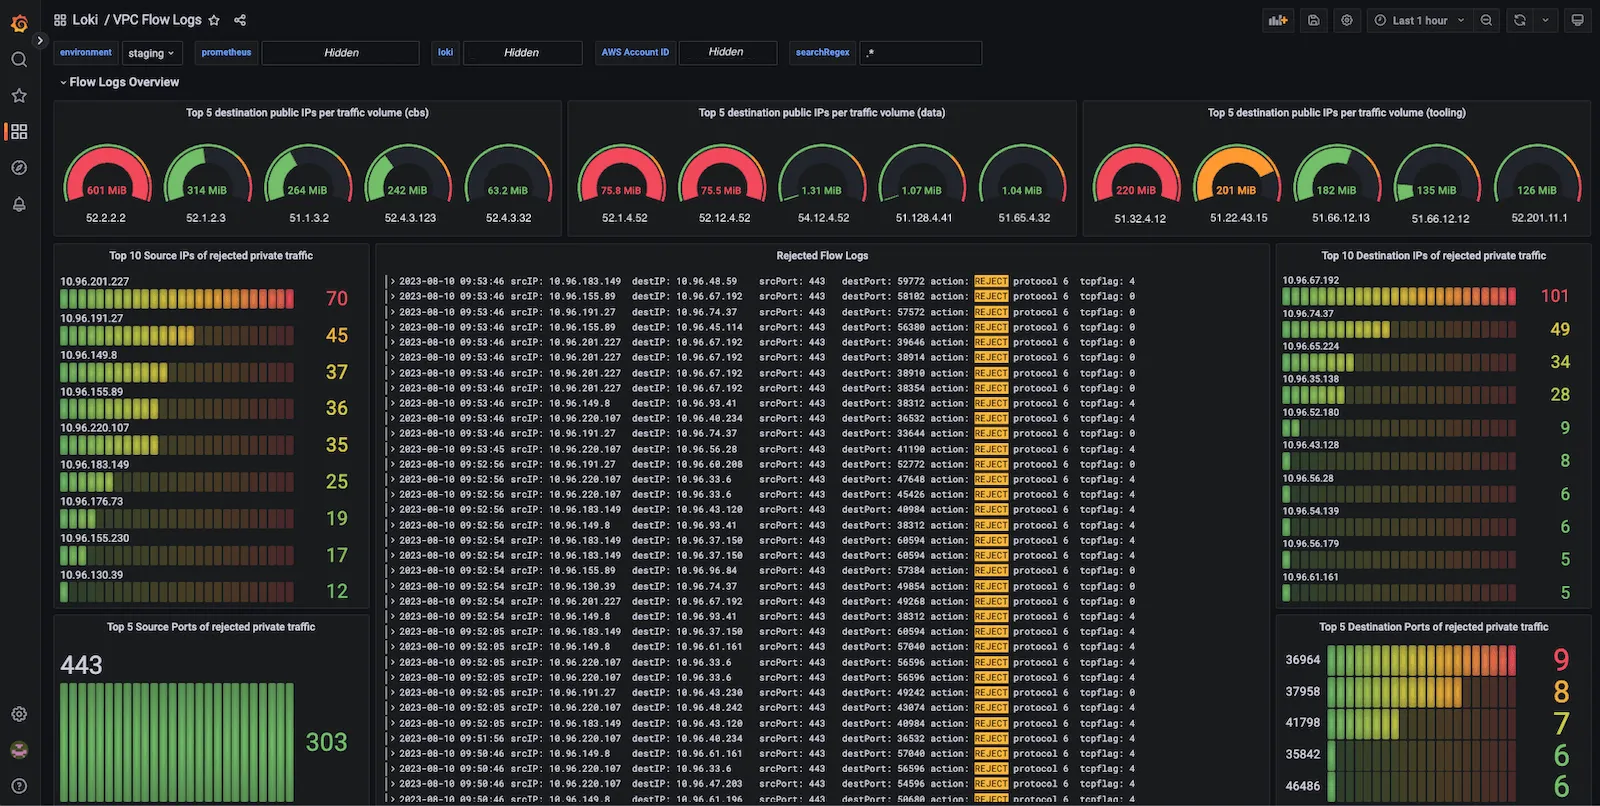 Collecting and viewing log files from Loki in Grafana